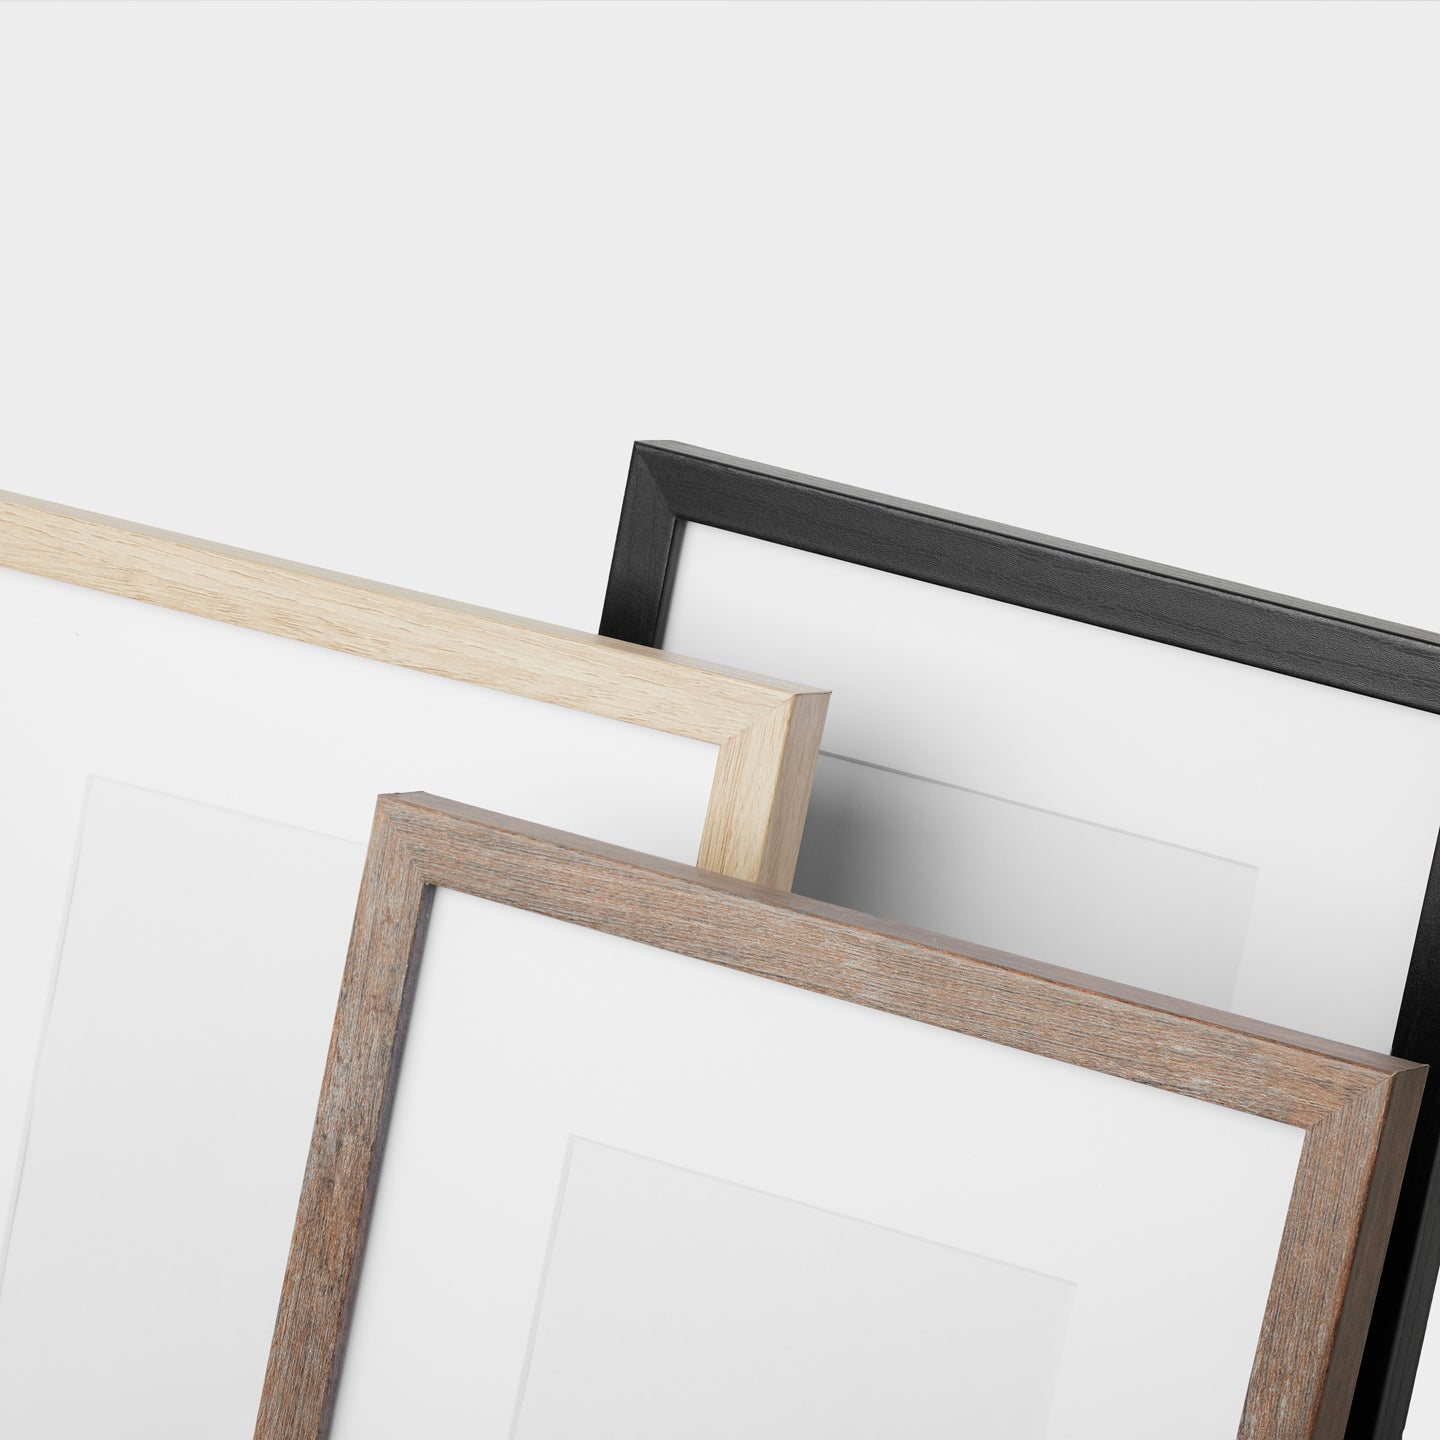 11x17 Dendro Wooden Gallery Frame | Tones Picture Frame Design